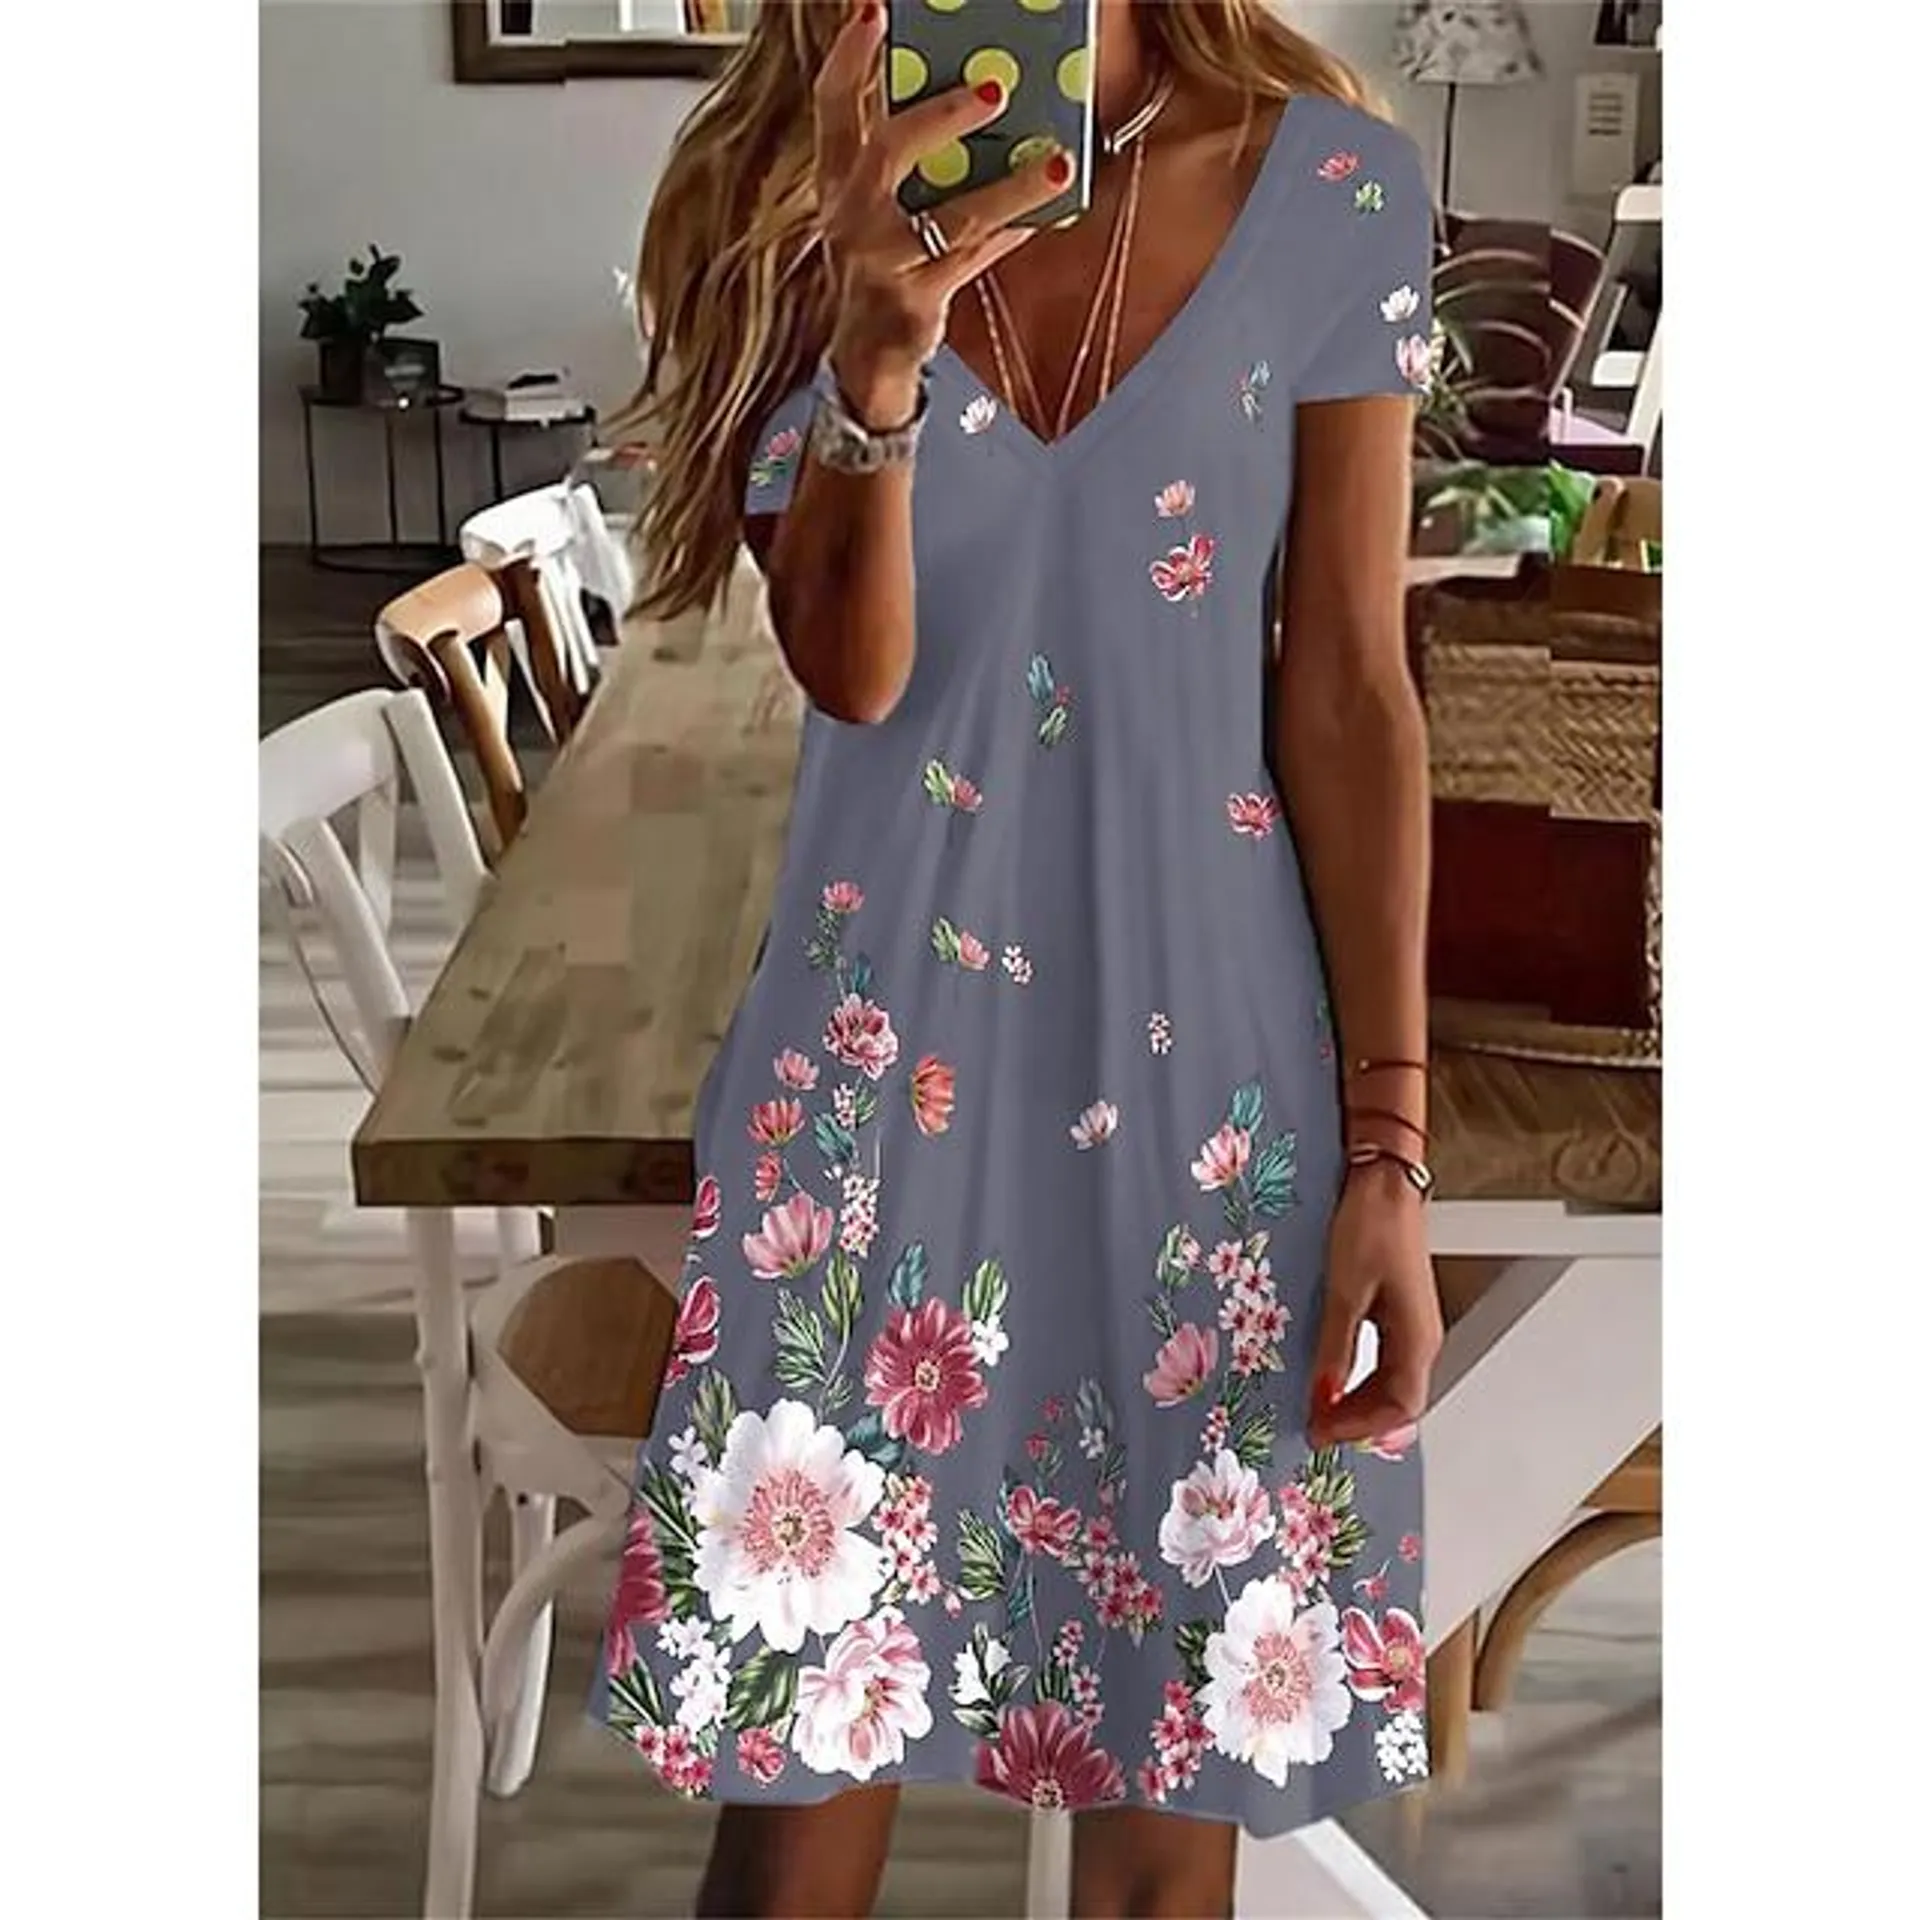 Women's Casual Dress Summer Dress Print Dress Floral Print V Neck Mini Dress Active Fashion Outdoor Daily Short Sleeve Regular Fit Black And White Olive Green Colourful Summer Spring S M L XL XXL